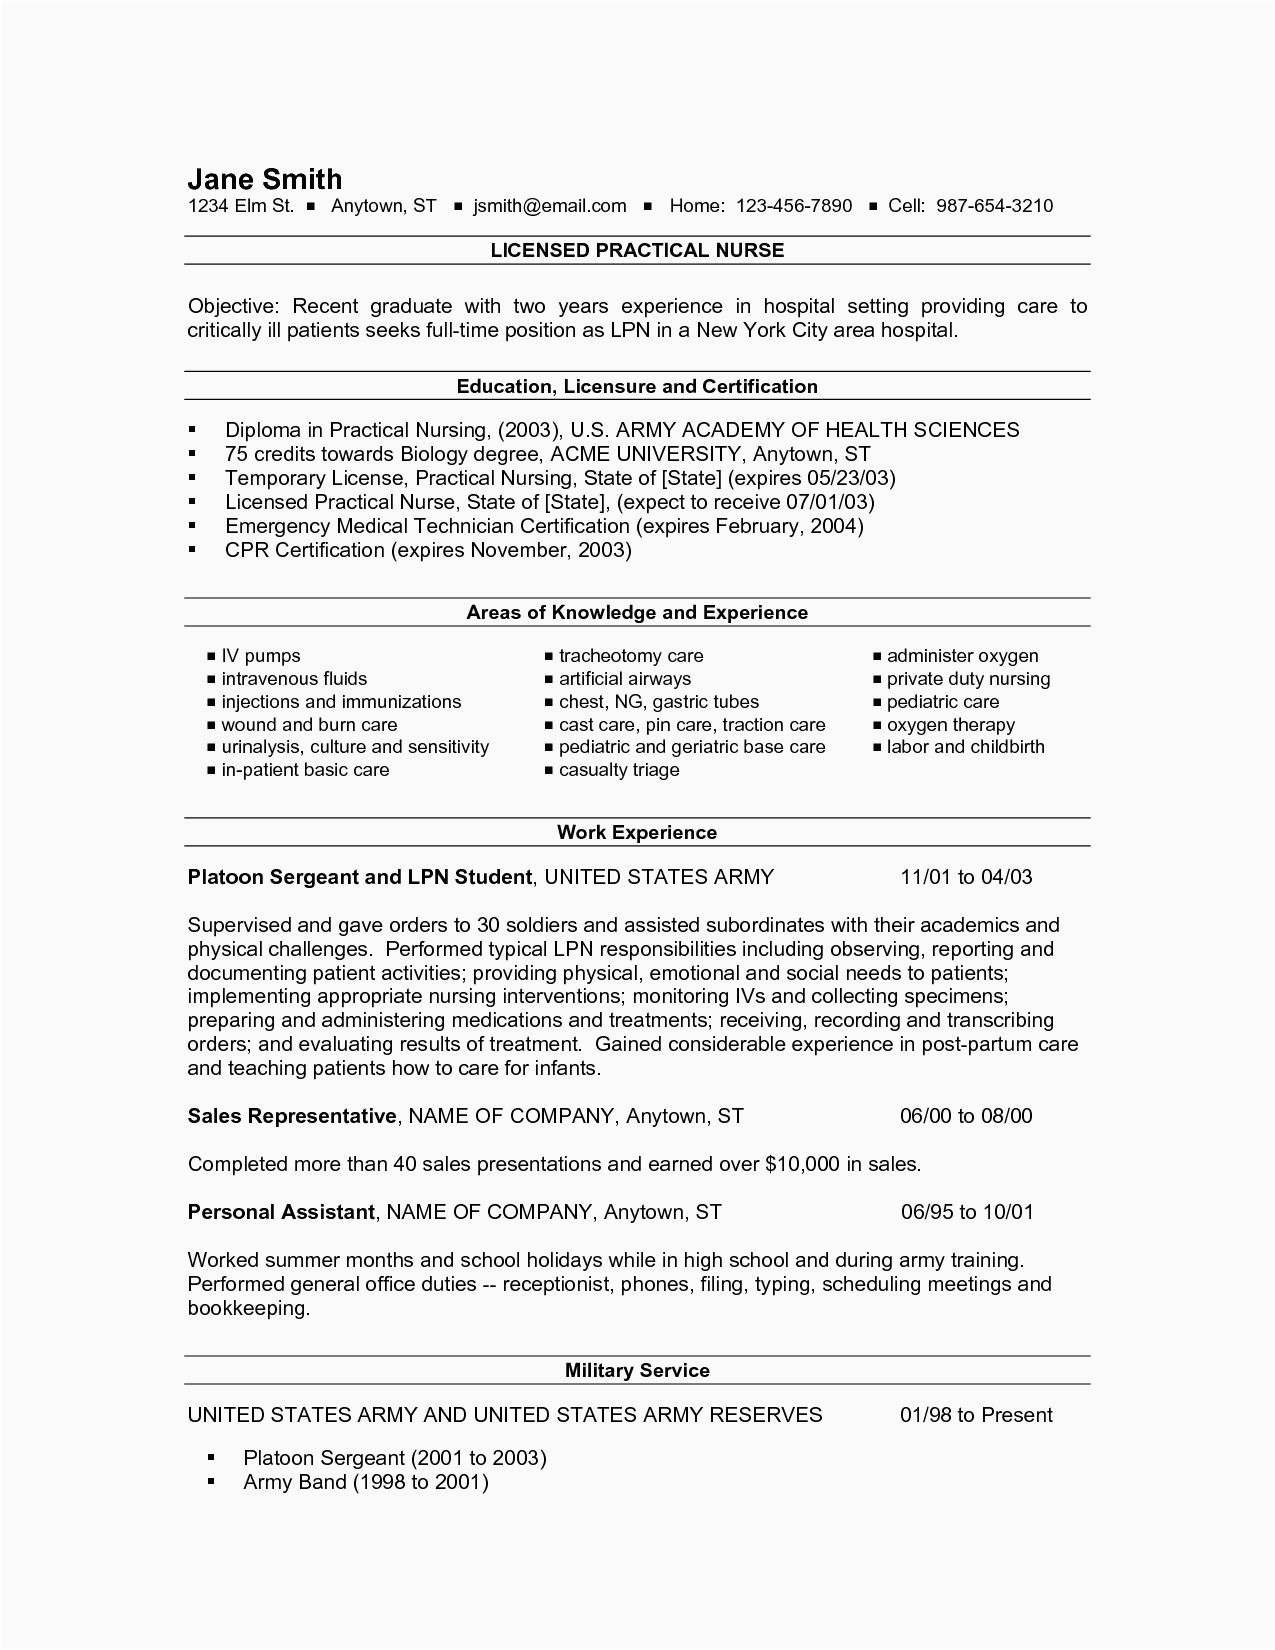 Sample Licensed Practical Nurse Resume Objective Pin On Example Cover Letter Template for Resume